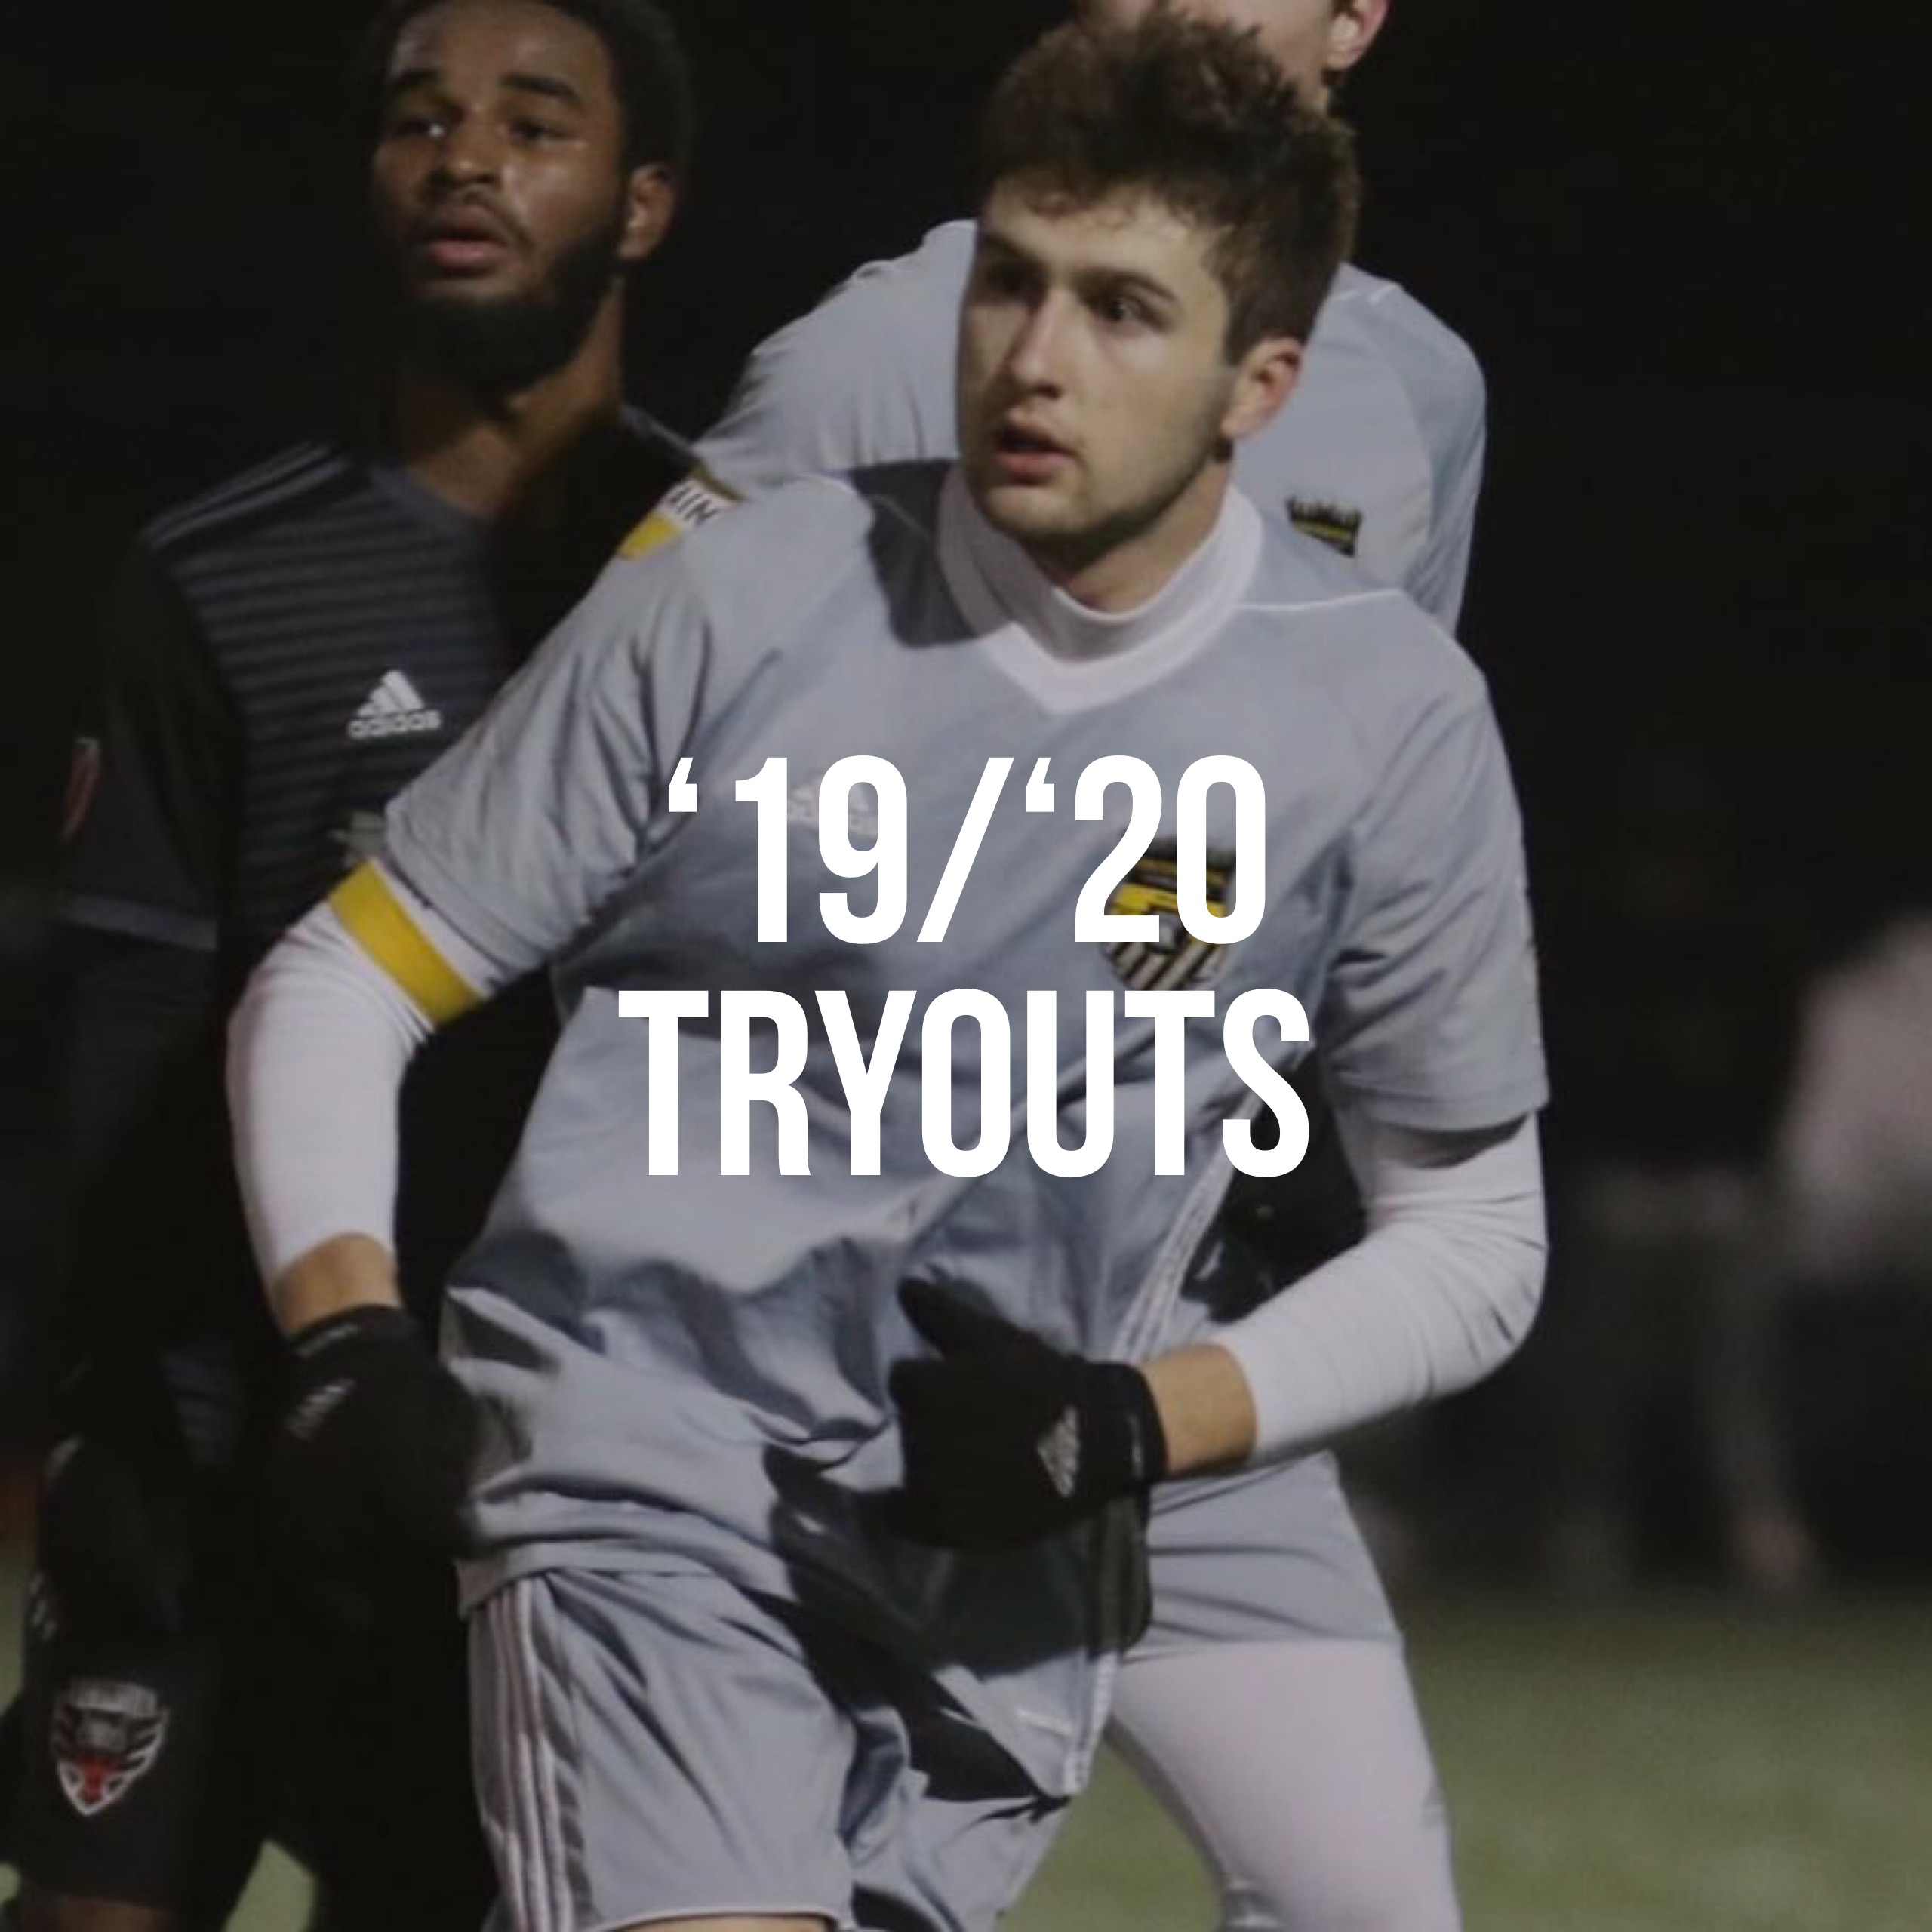 '19/'20 Tryouts